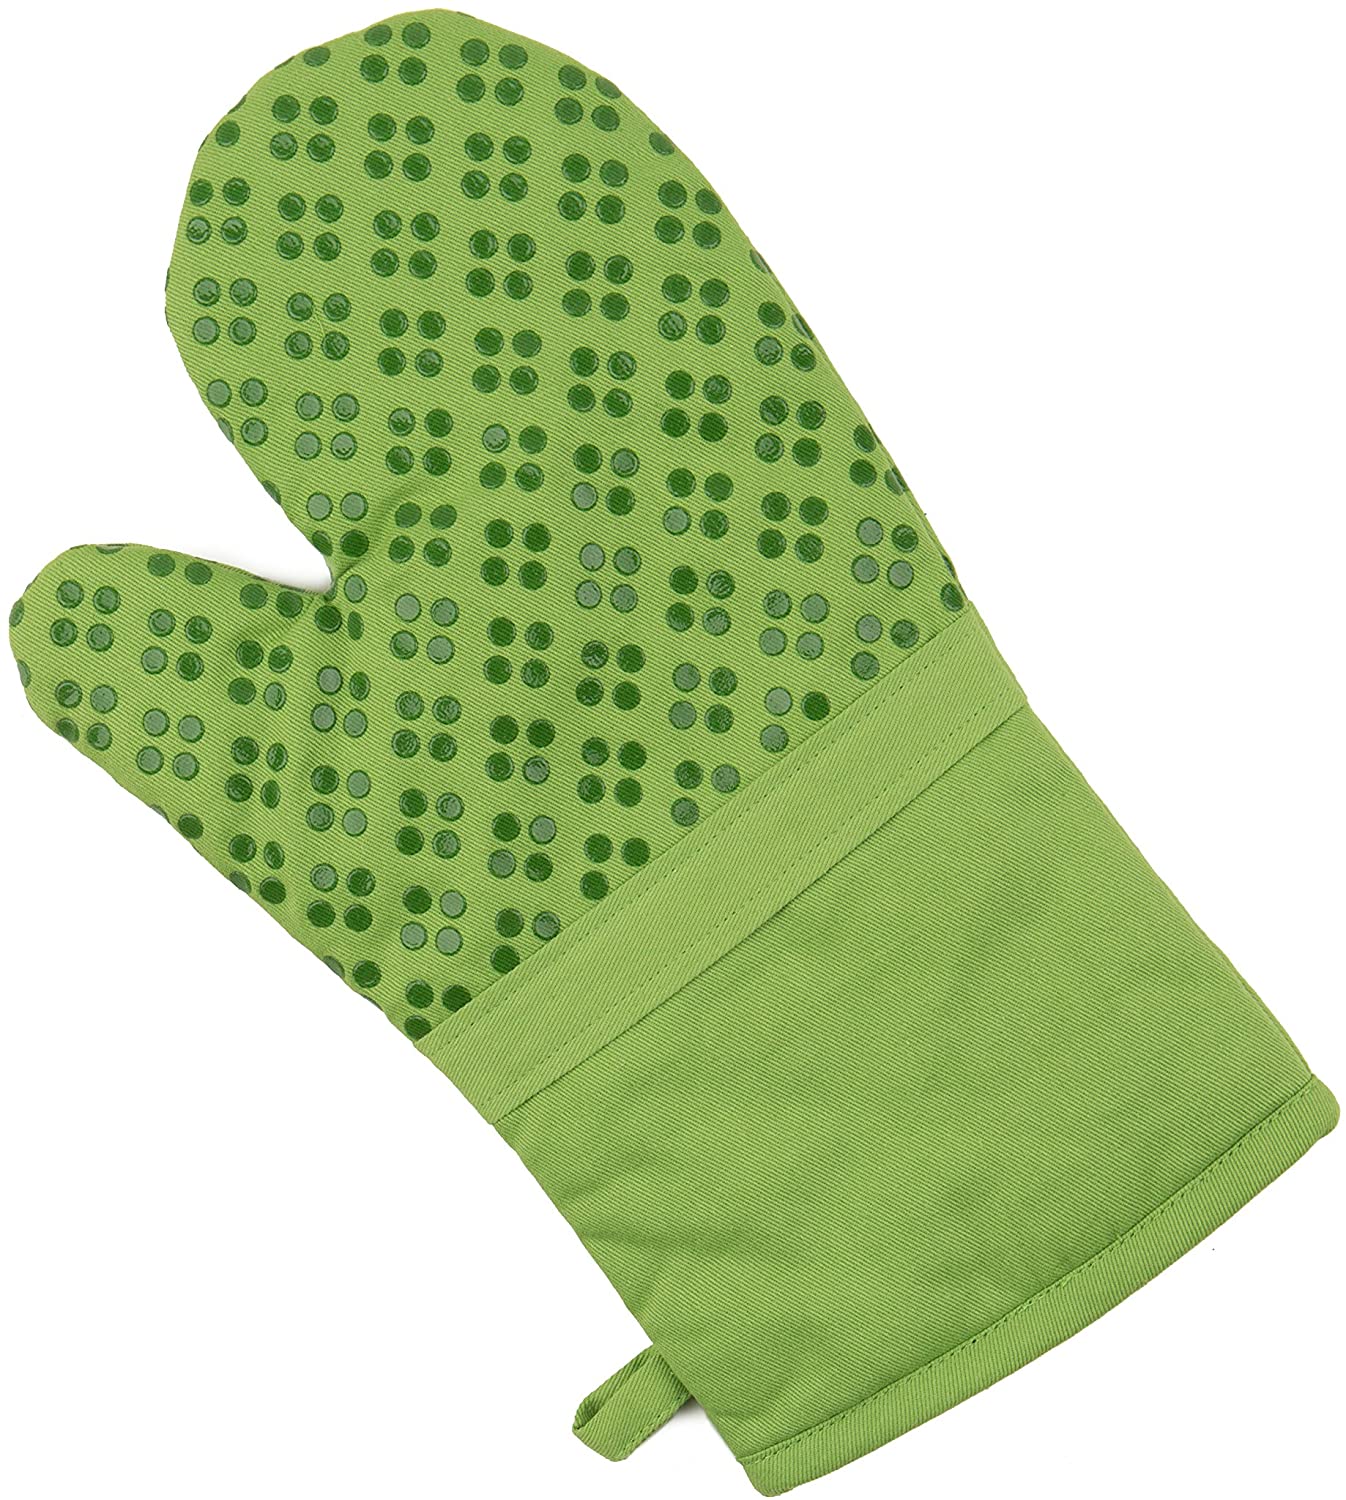 Sticky Toffee Silicone Printed Oven Mitt & Pot Holder, Cotton Terry Ki –  Sticky Toffee Textiles